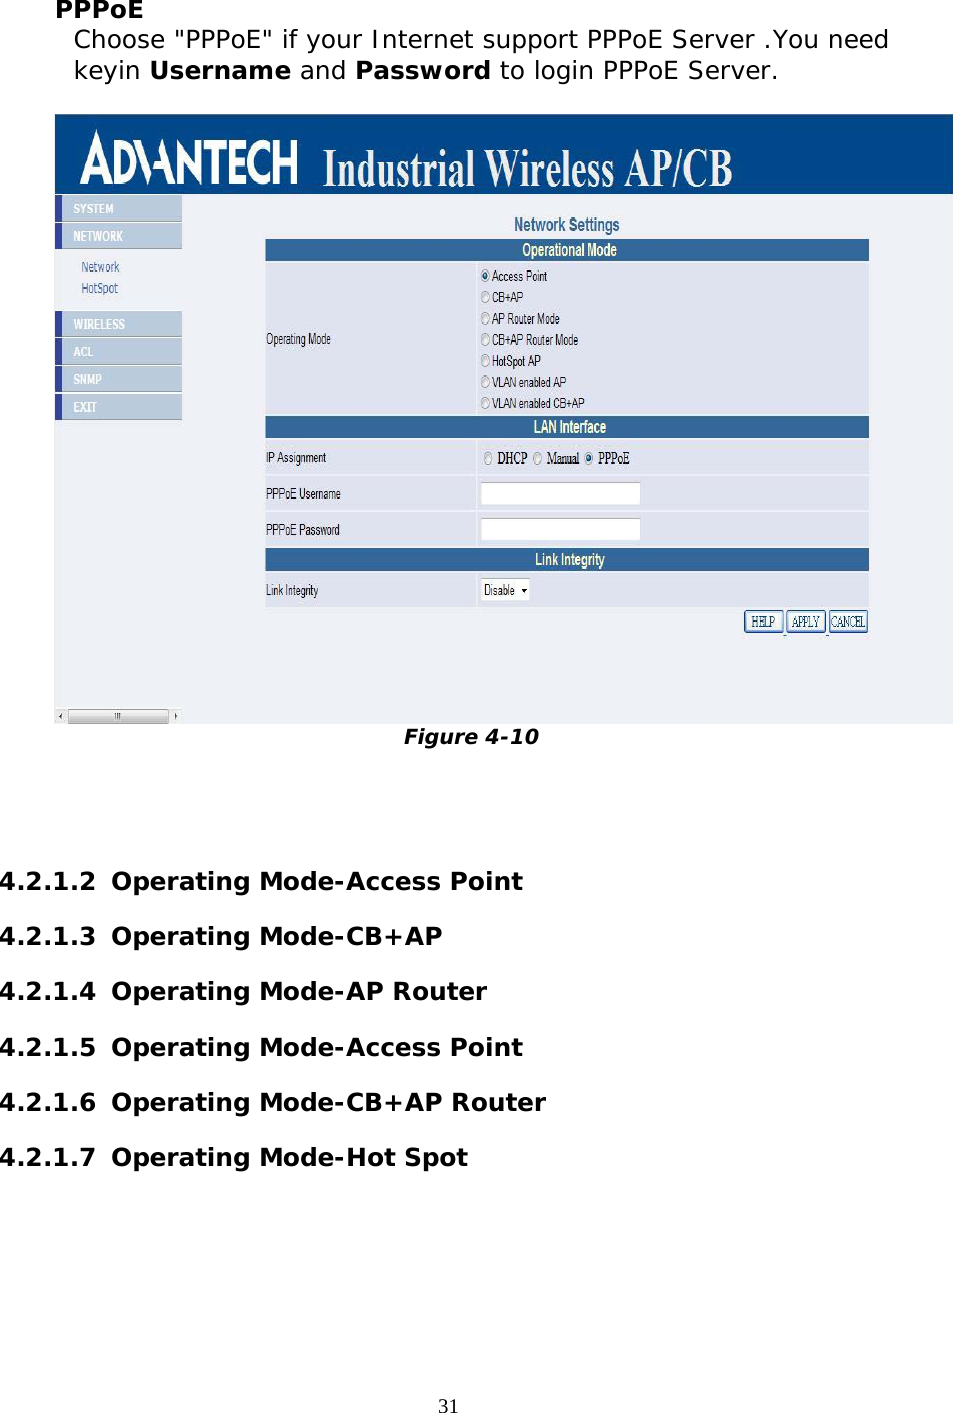                   PPPoE Choose &quot;PPPoE&quot; if your Internet support PPPoE Server .You need keyin Username and Password to login PPPoE Server.    Figure 4-10    4.2.1.2  Operating Mode-Access Point 4.2.1.3  Operating Mode-CB+AP 4.2.1.4  Operating Mode-AP Router  4.2.1.5  Operating Mode-Access Point 4.2.1.6  Operating Mode-CB+AP Router 4.2.1.7  Operating Mode-Hot Spot   31 